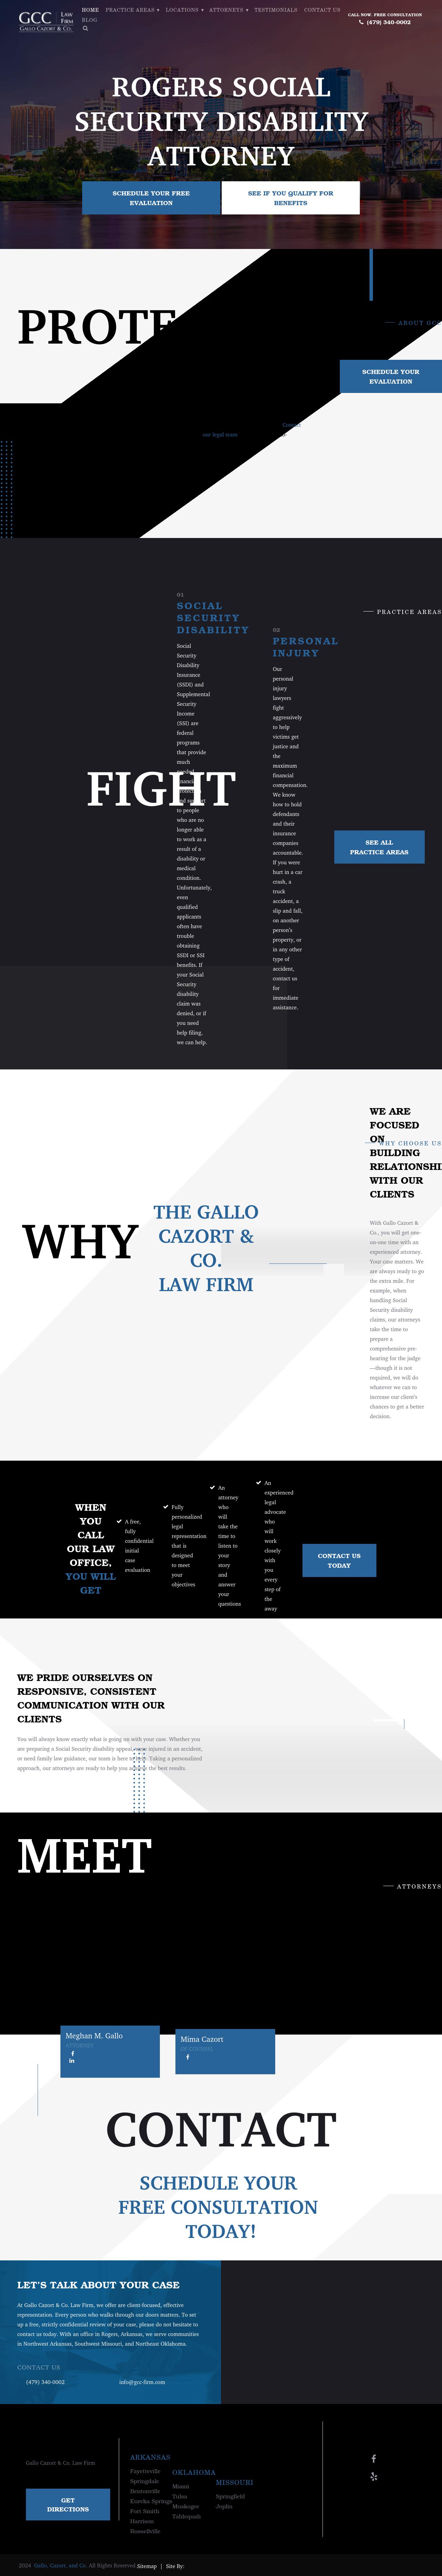 Gallo Cazort & Co. Law Firm - Rogers AR Lawyers